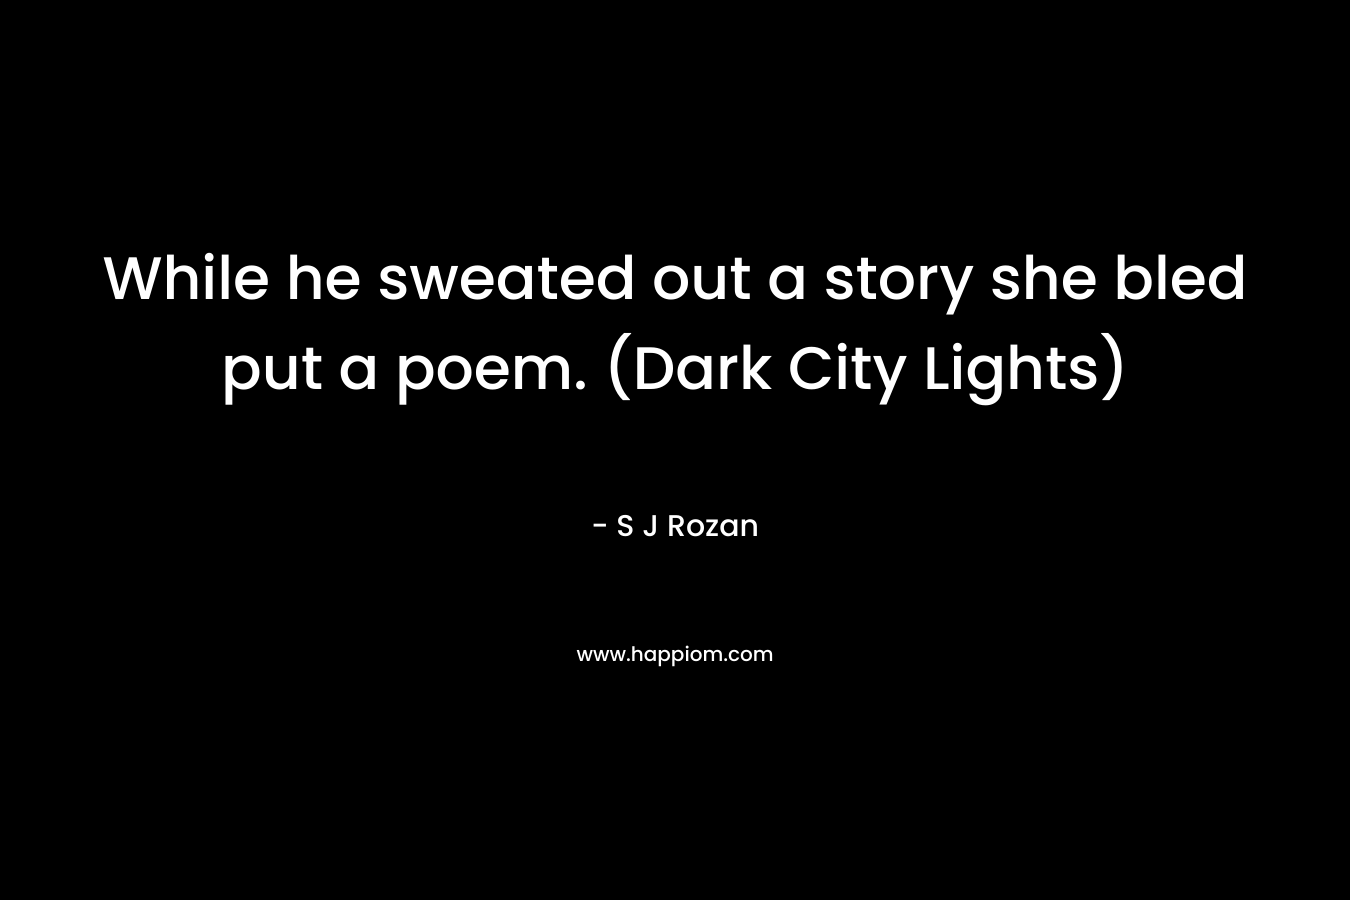 While he sweated out a story she bled put a poem. (Dark City Lights)